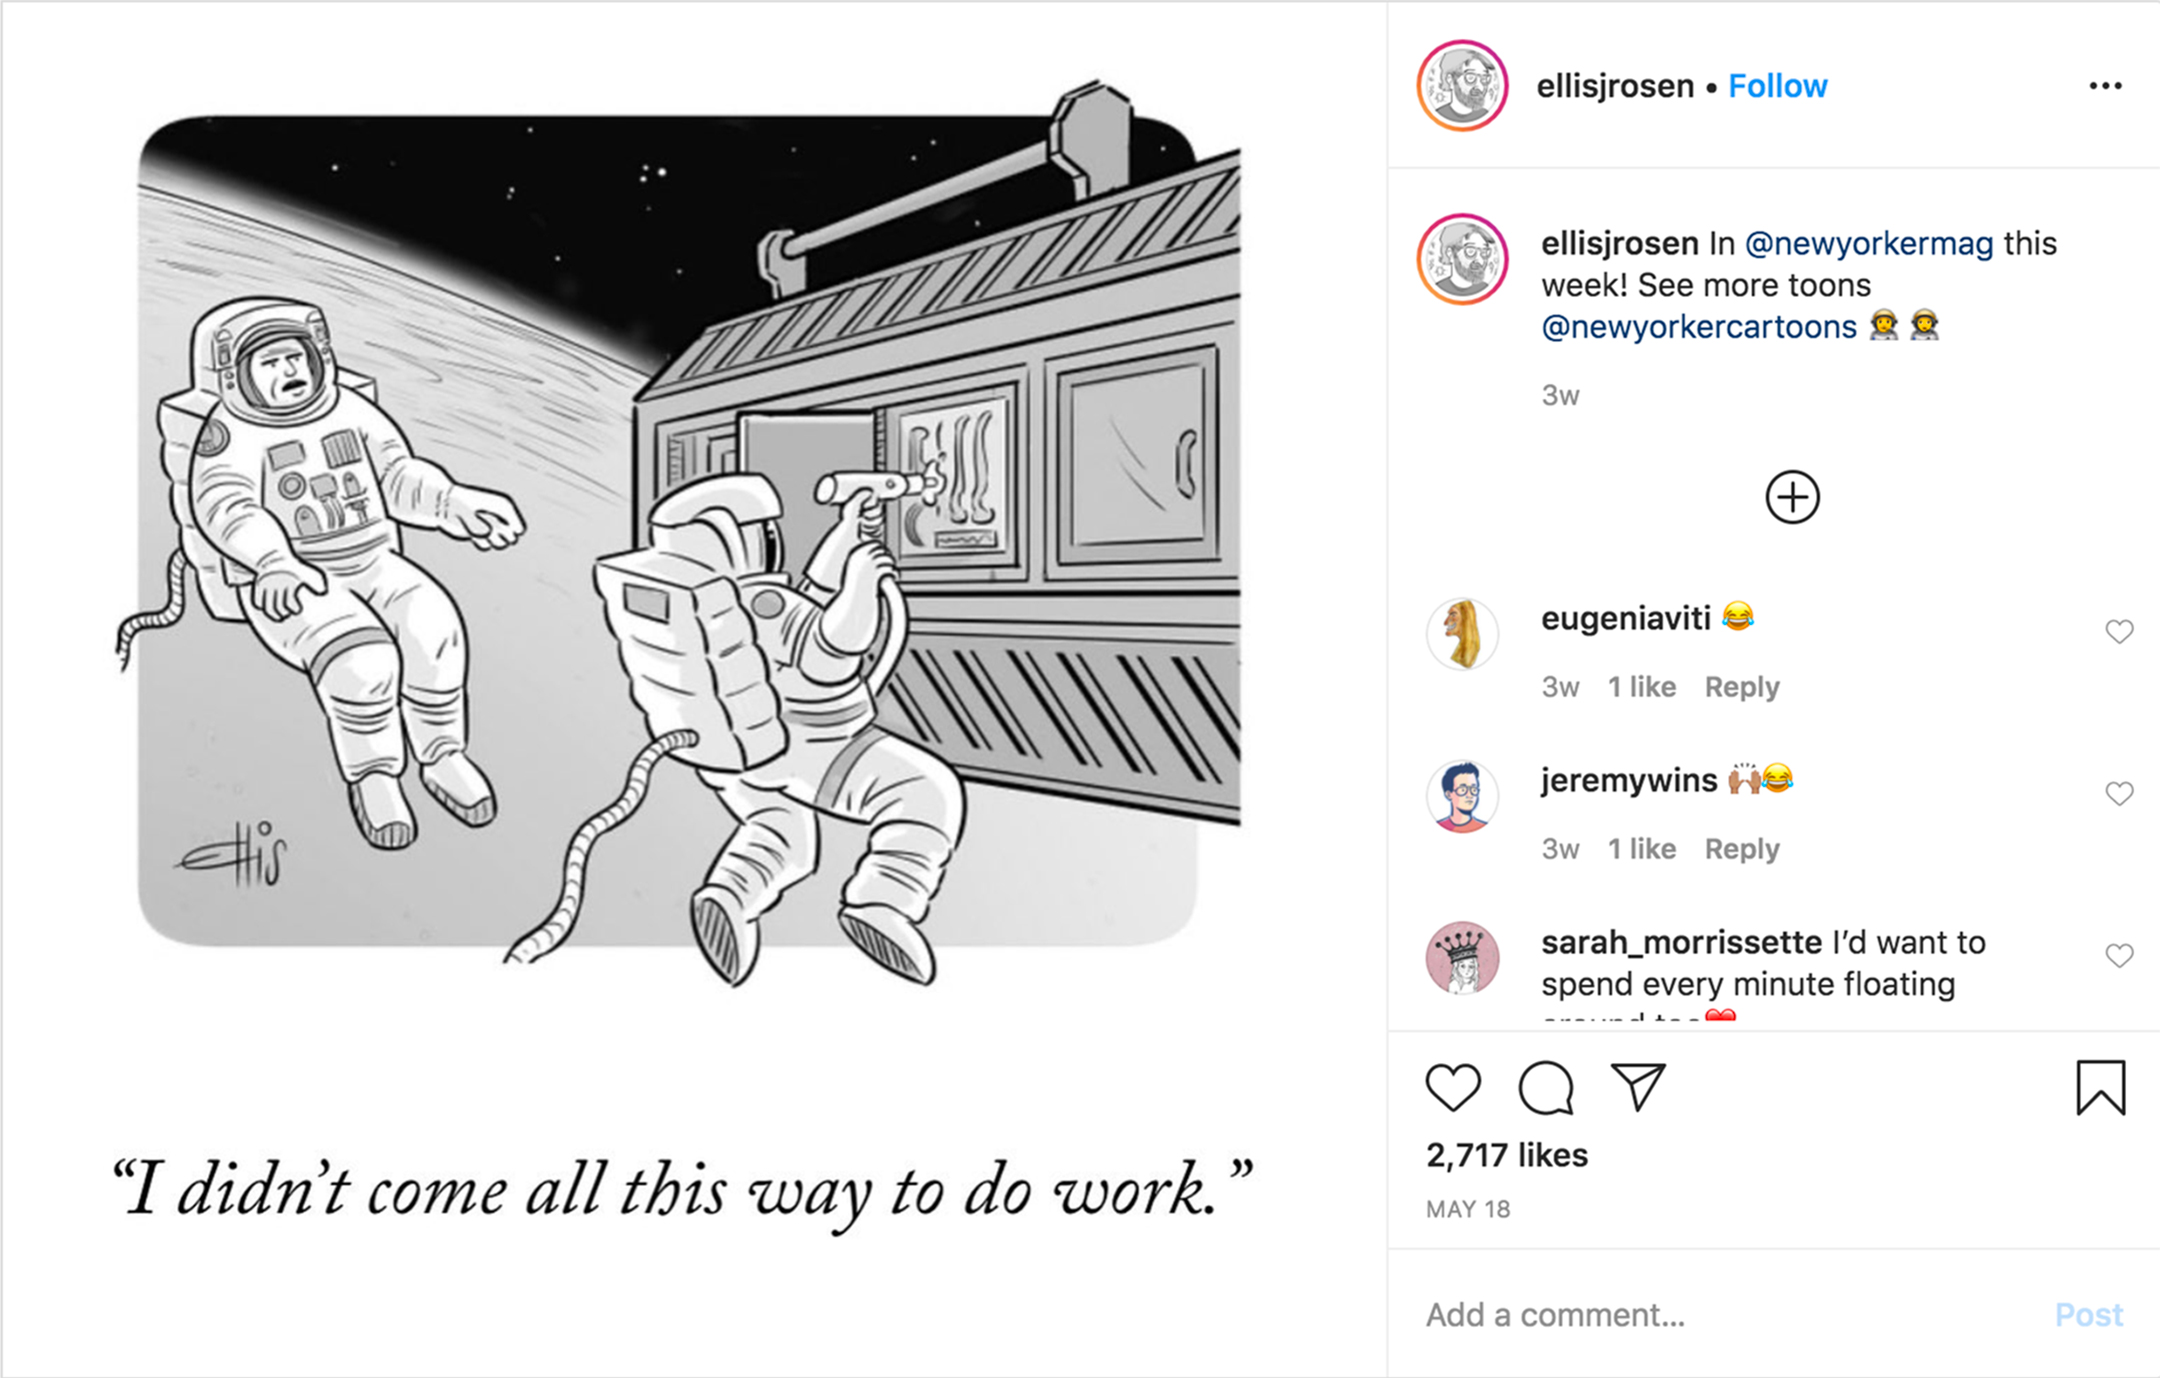 screenshot of an instragram page showing a cartoon of two astronauts working above earth, one complaining about not wanting to work